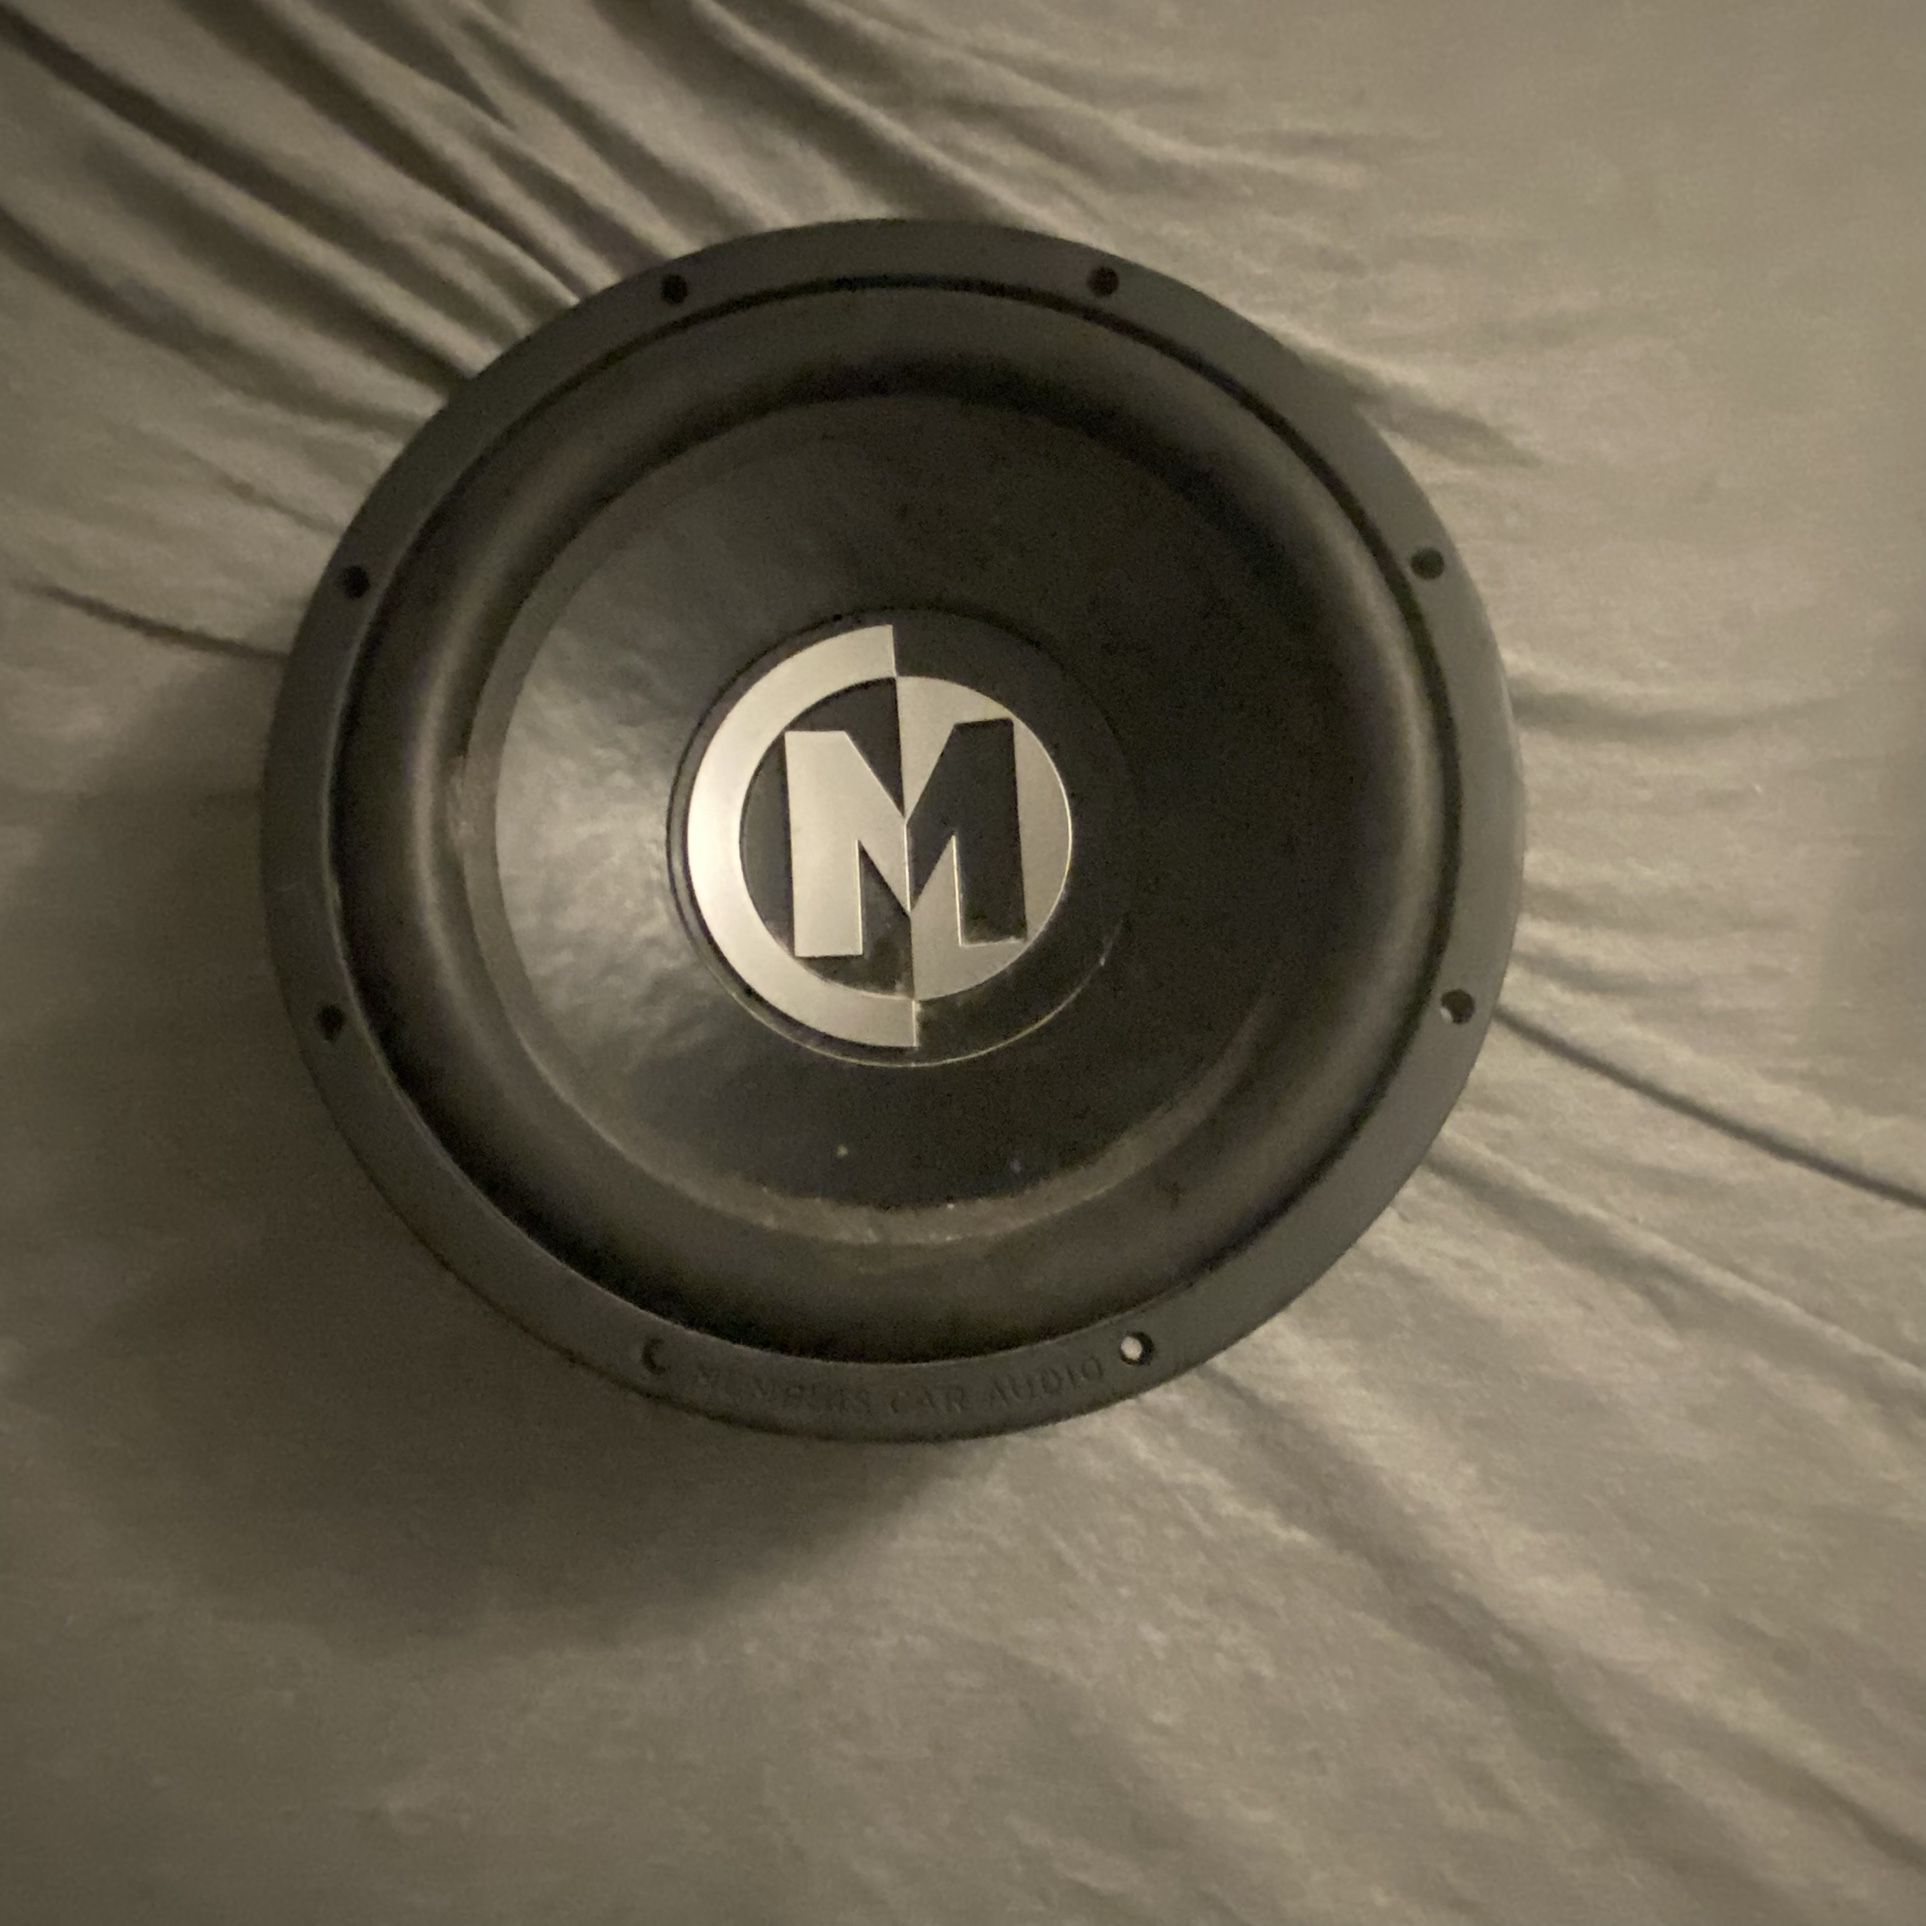 12” Memphis Pr 12 Subwoofer Mounted Never Hooked Up